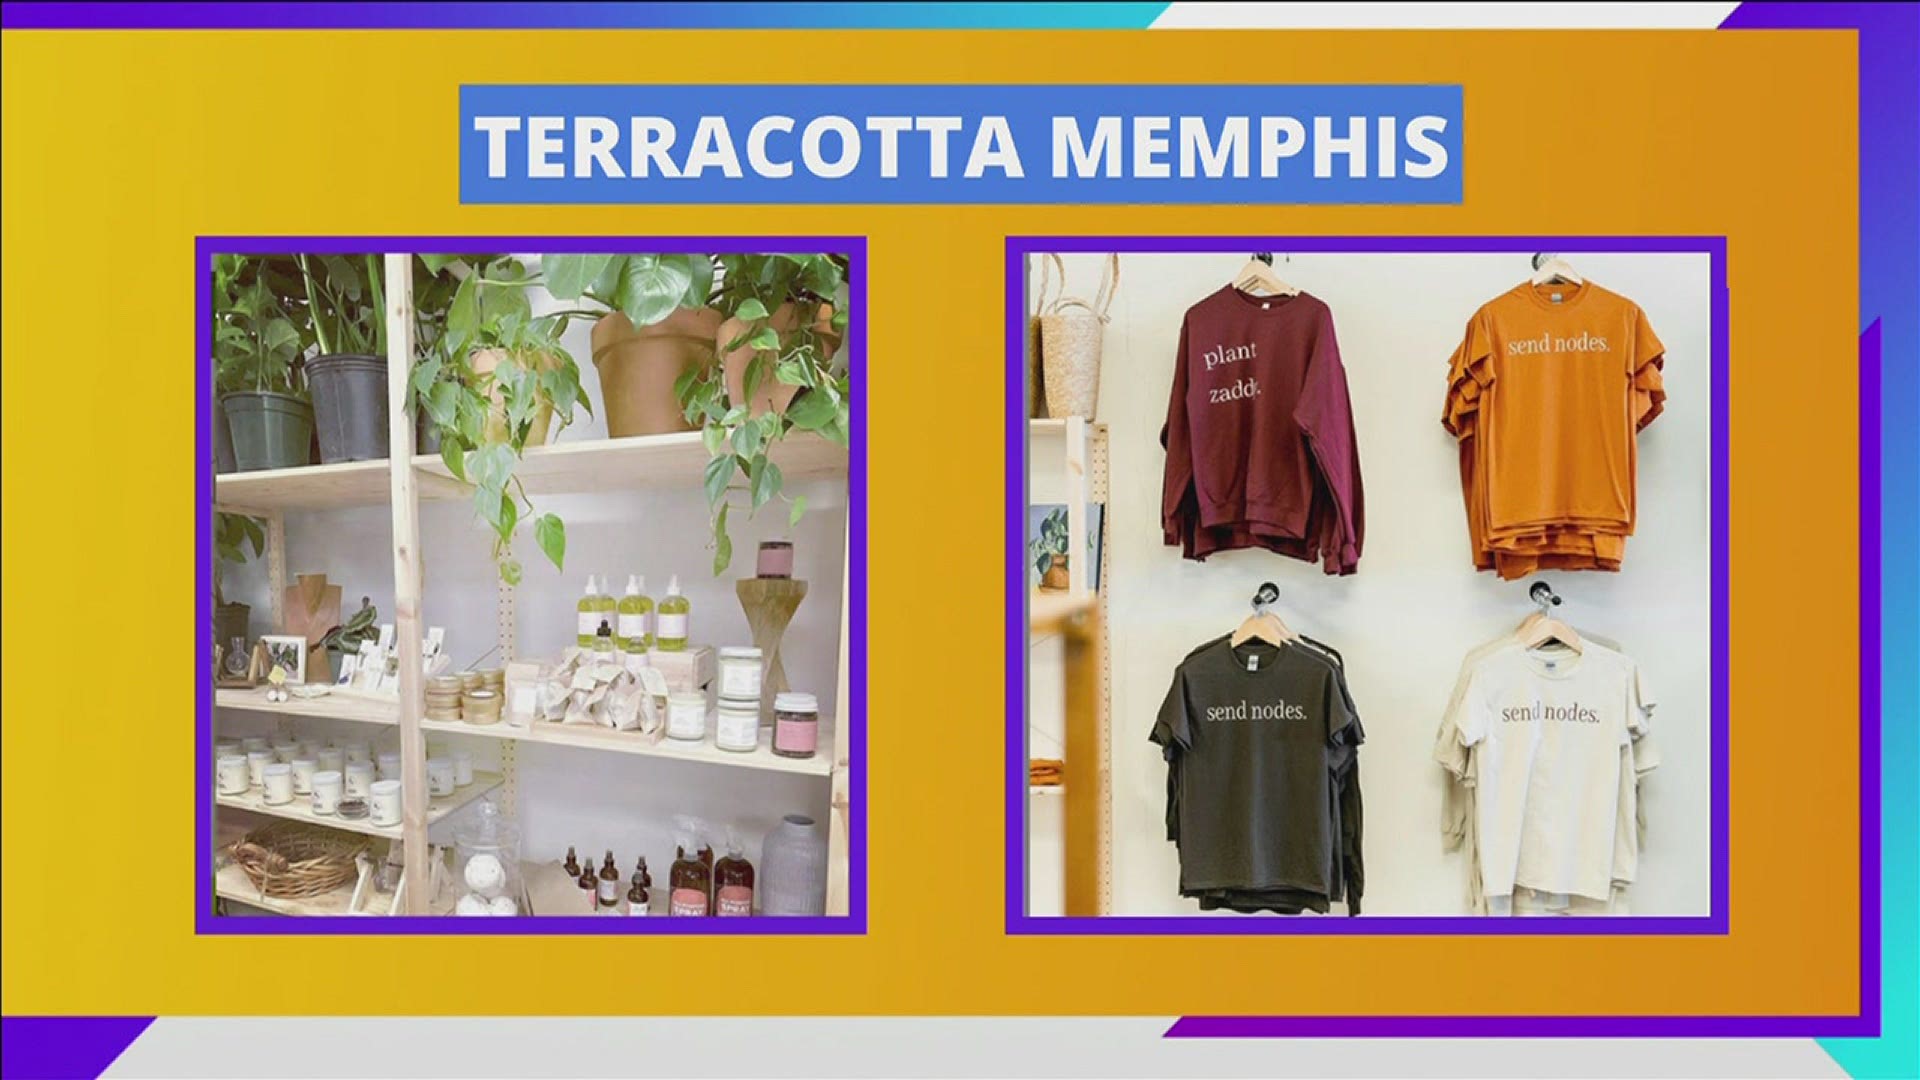 Love supporting black-owned businesses and/or raising plants? Check out Terracotta Memphis!